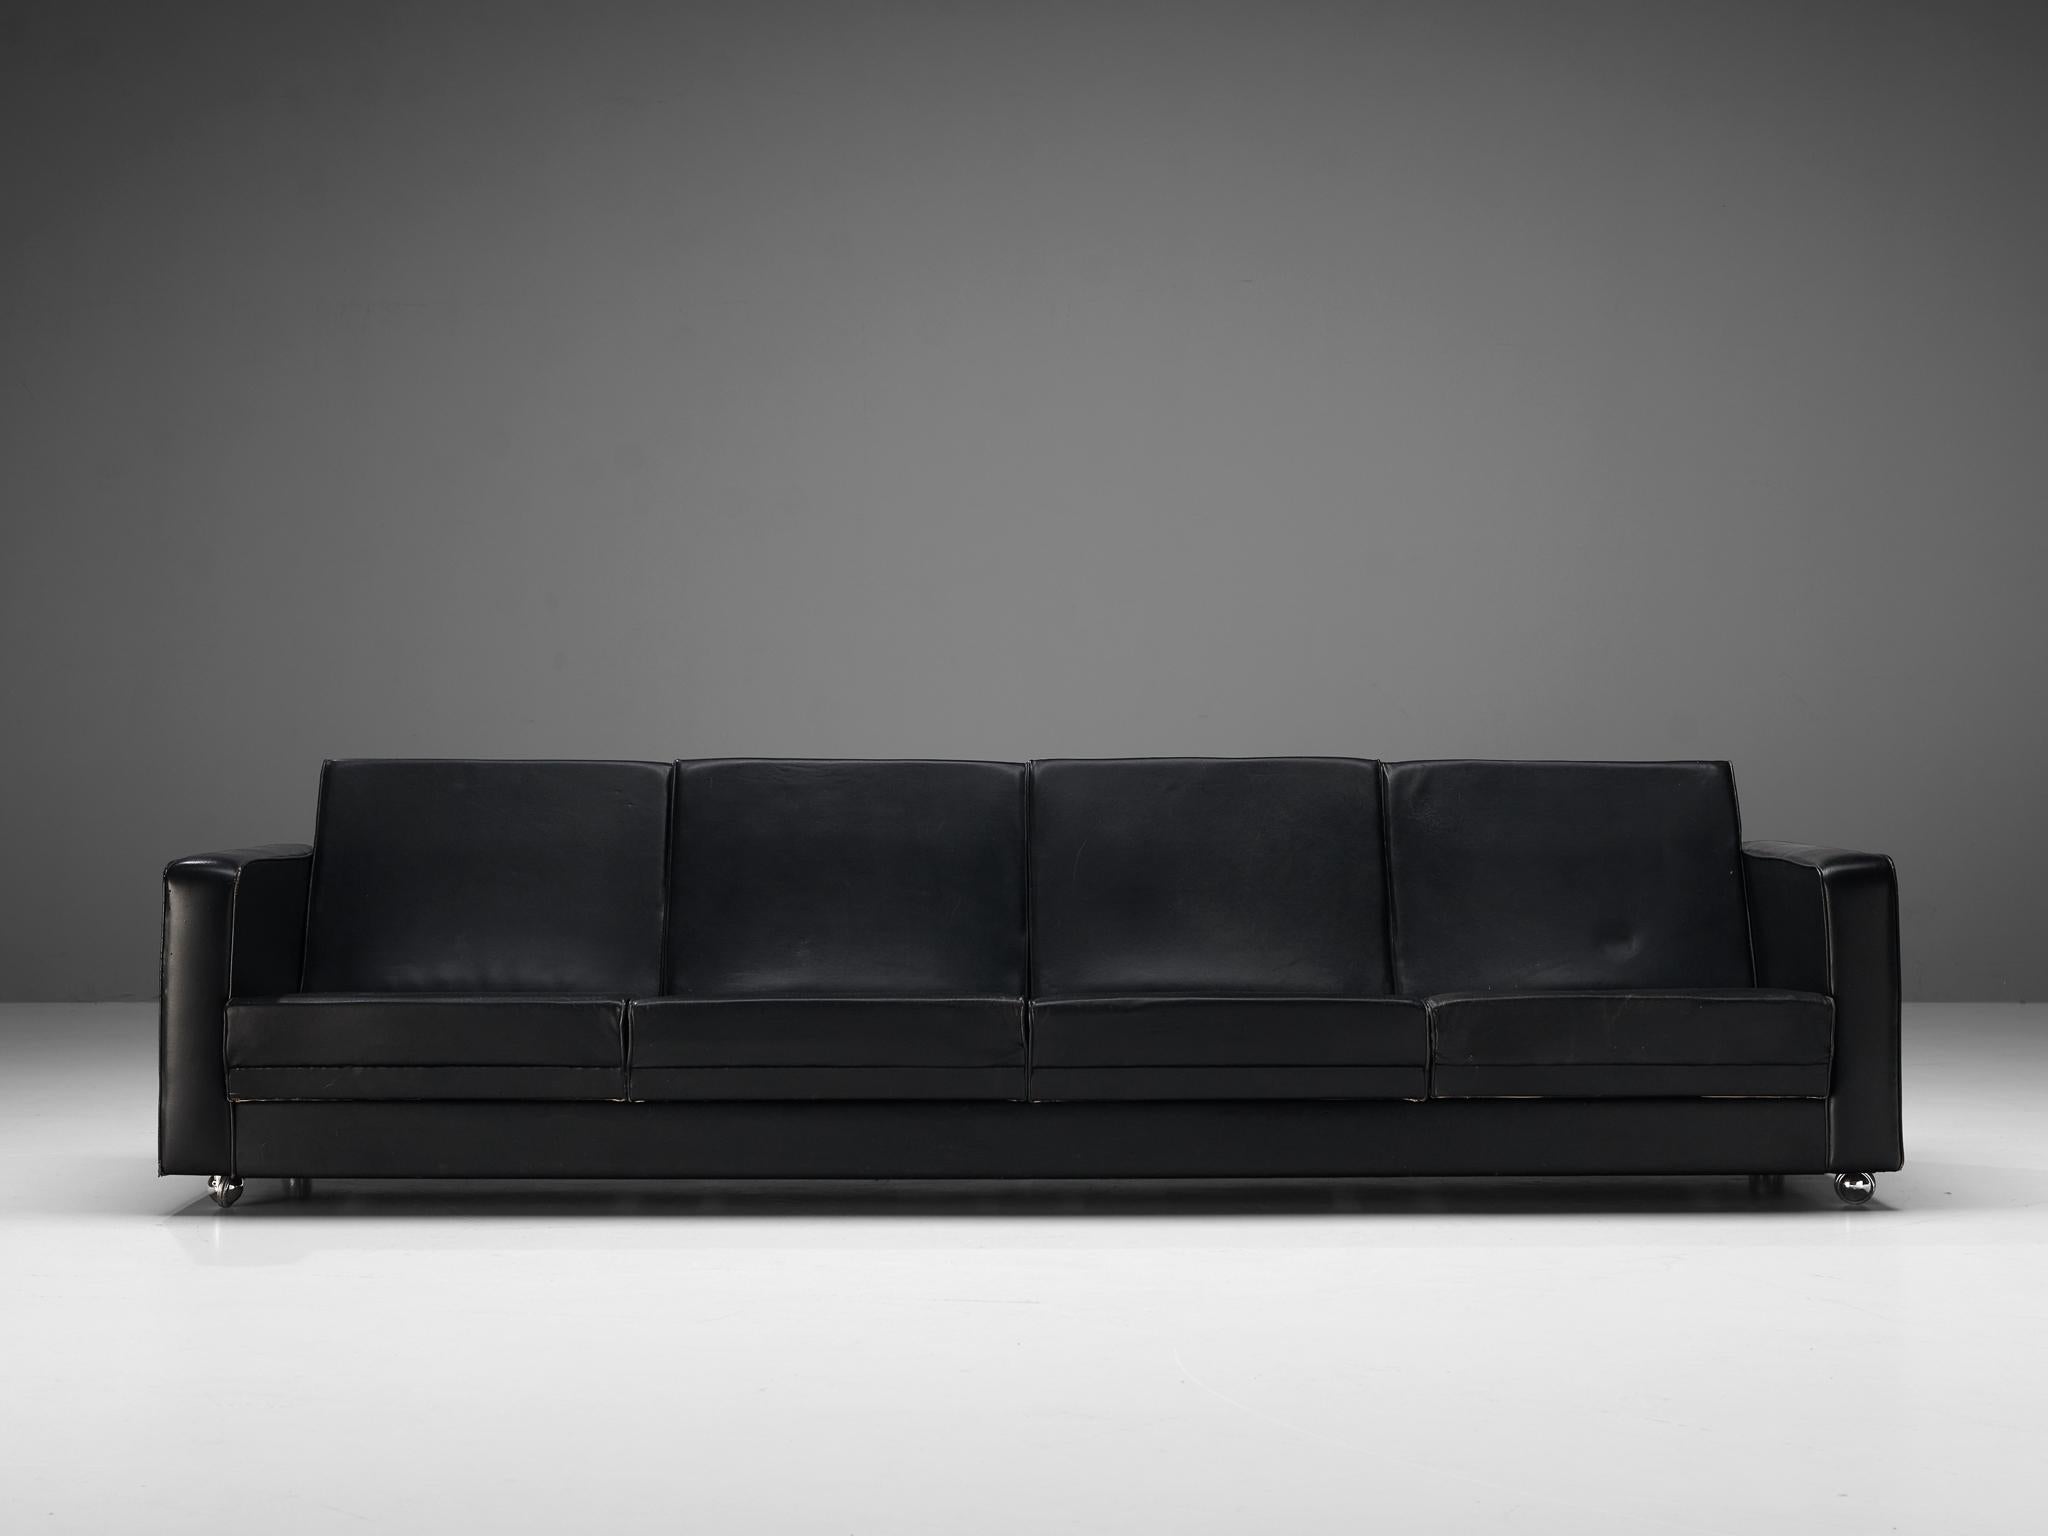 Mid-20th Century Sleek Four-Seat Danish Sofa in Black Leatherette  For Sale